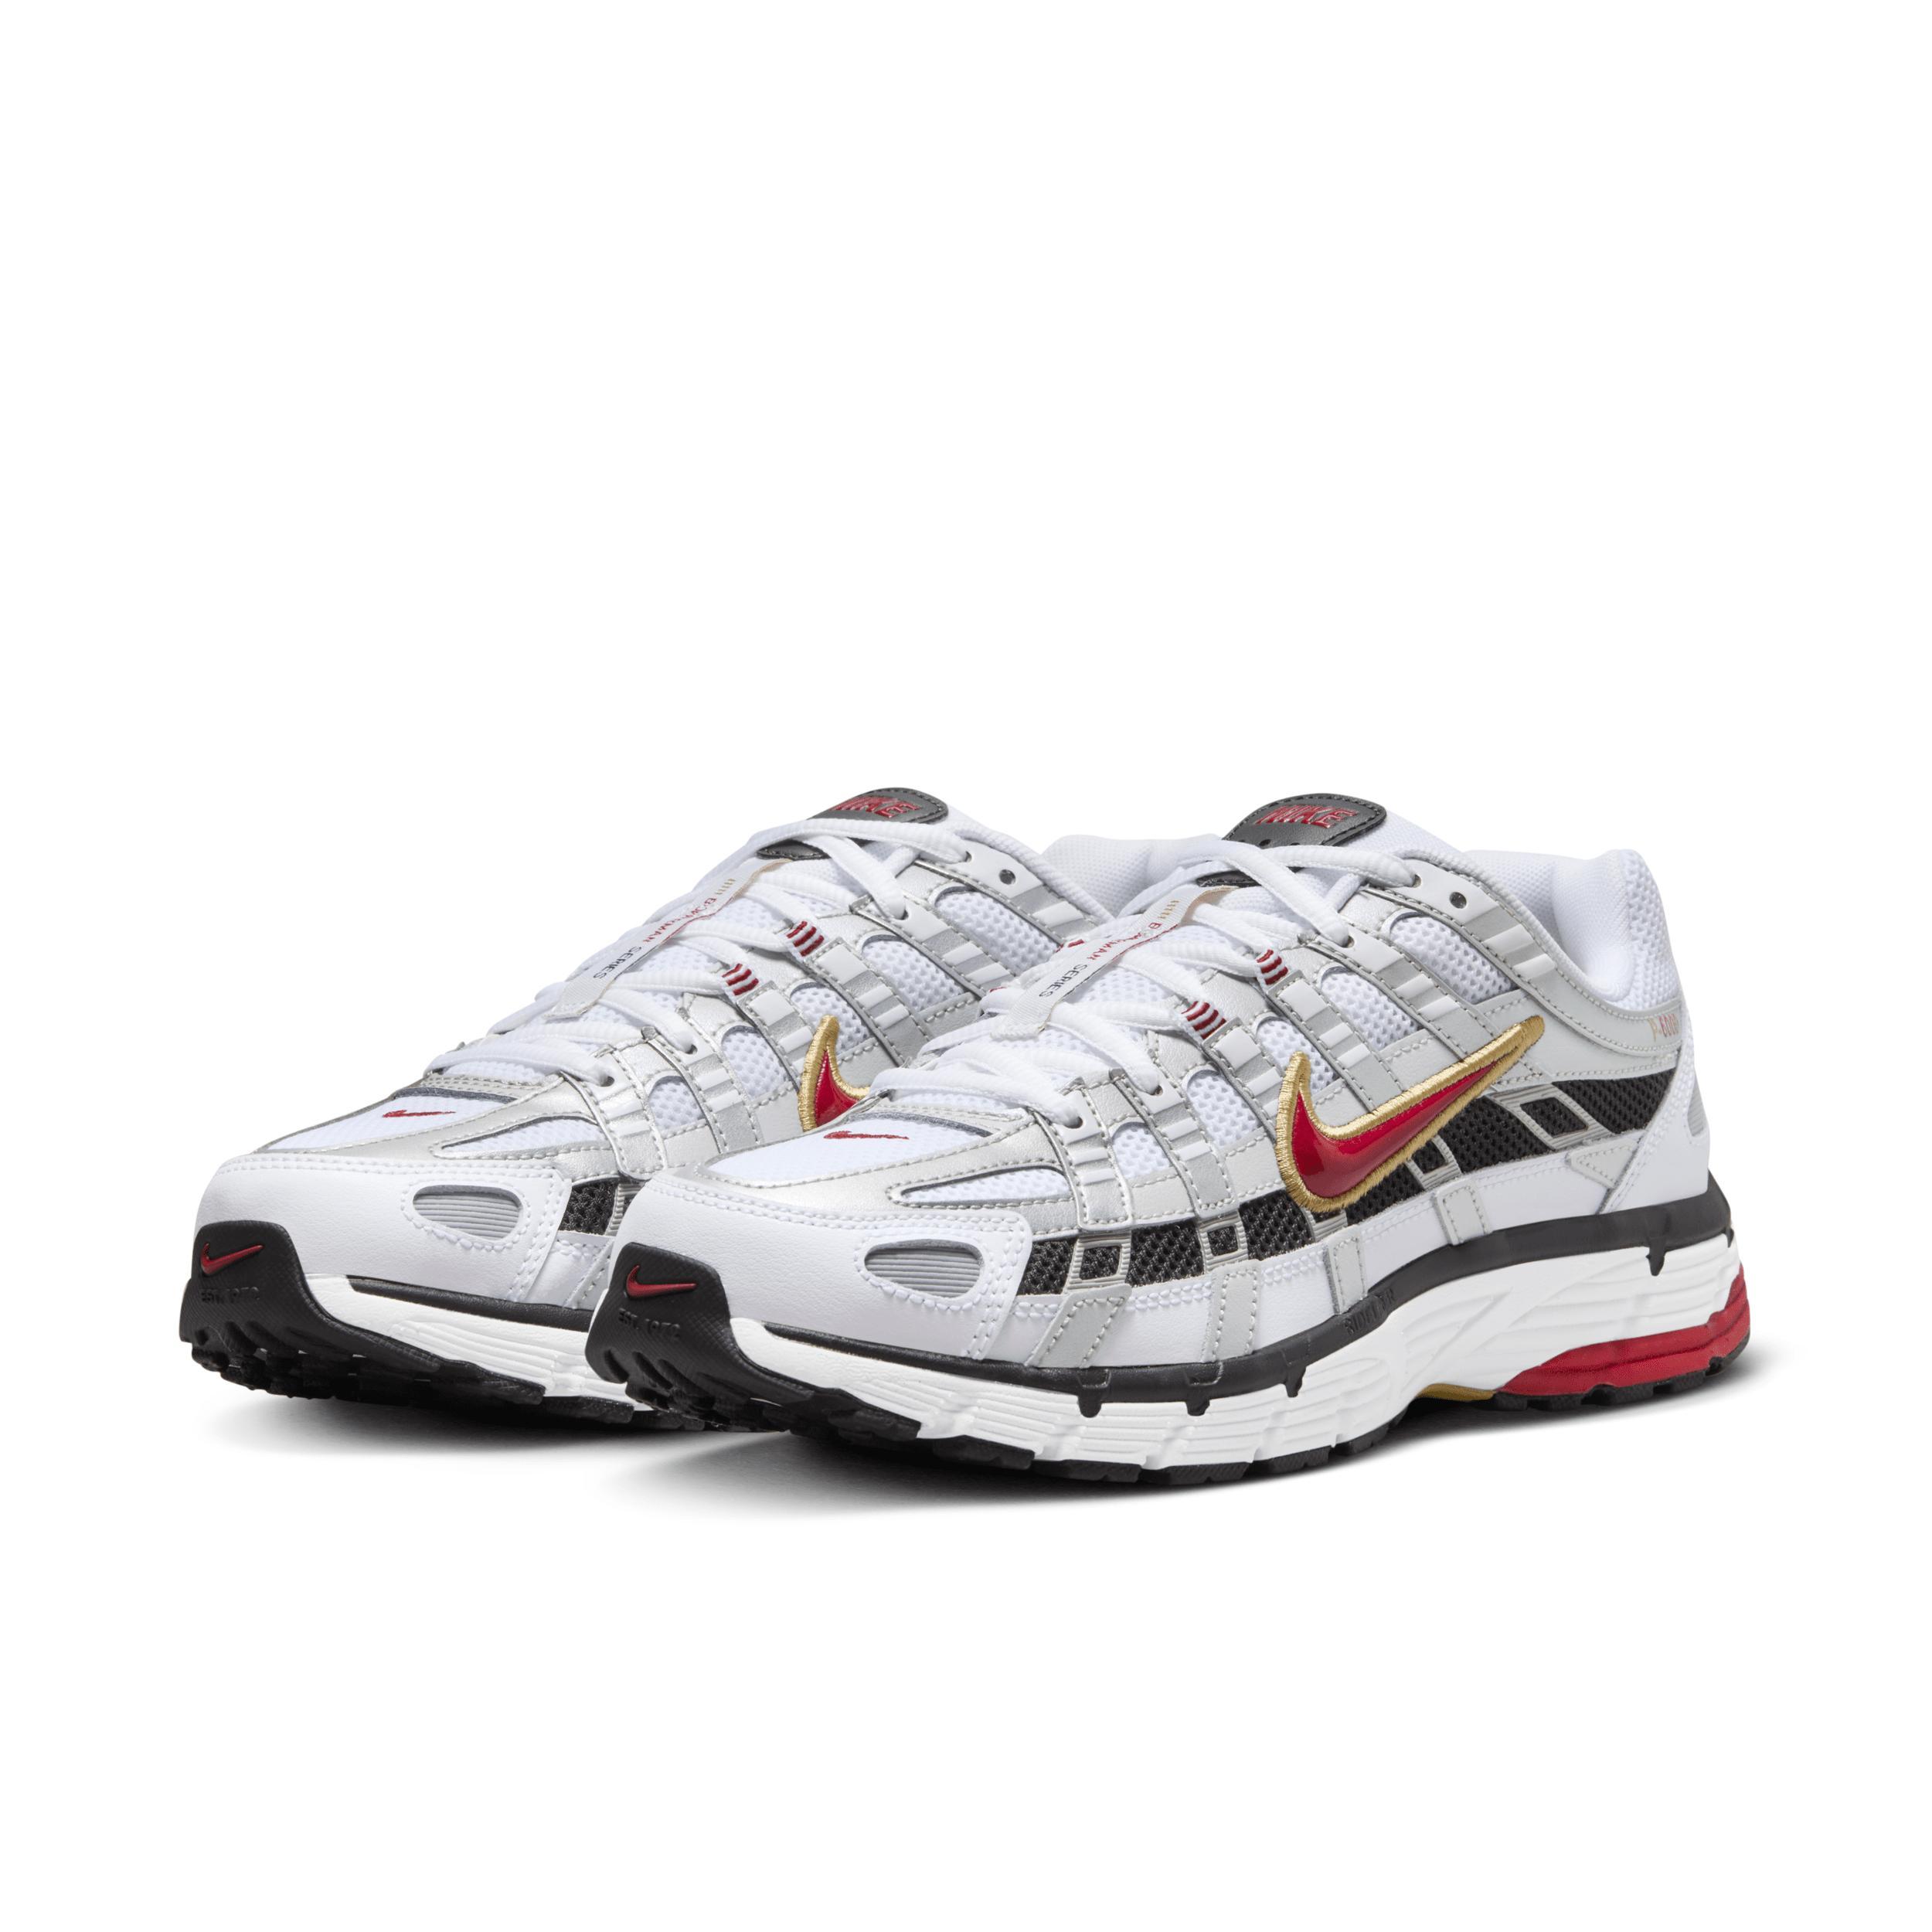 Nike P-6000 sneakers Product Image